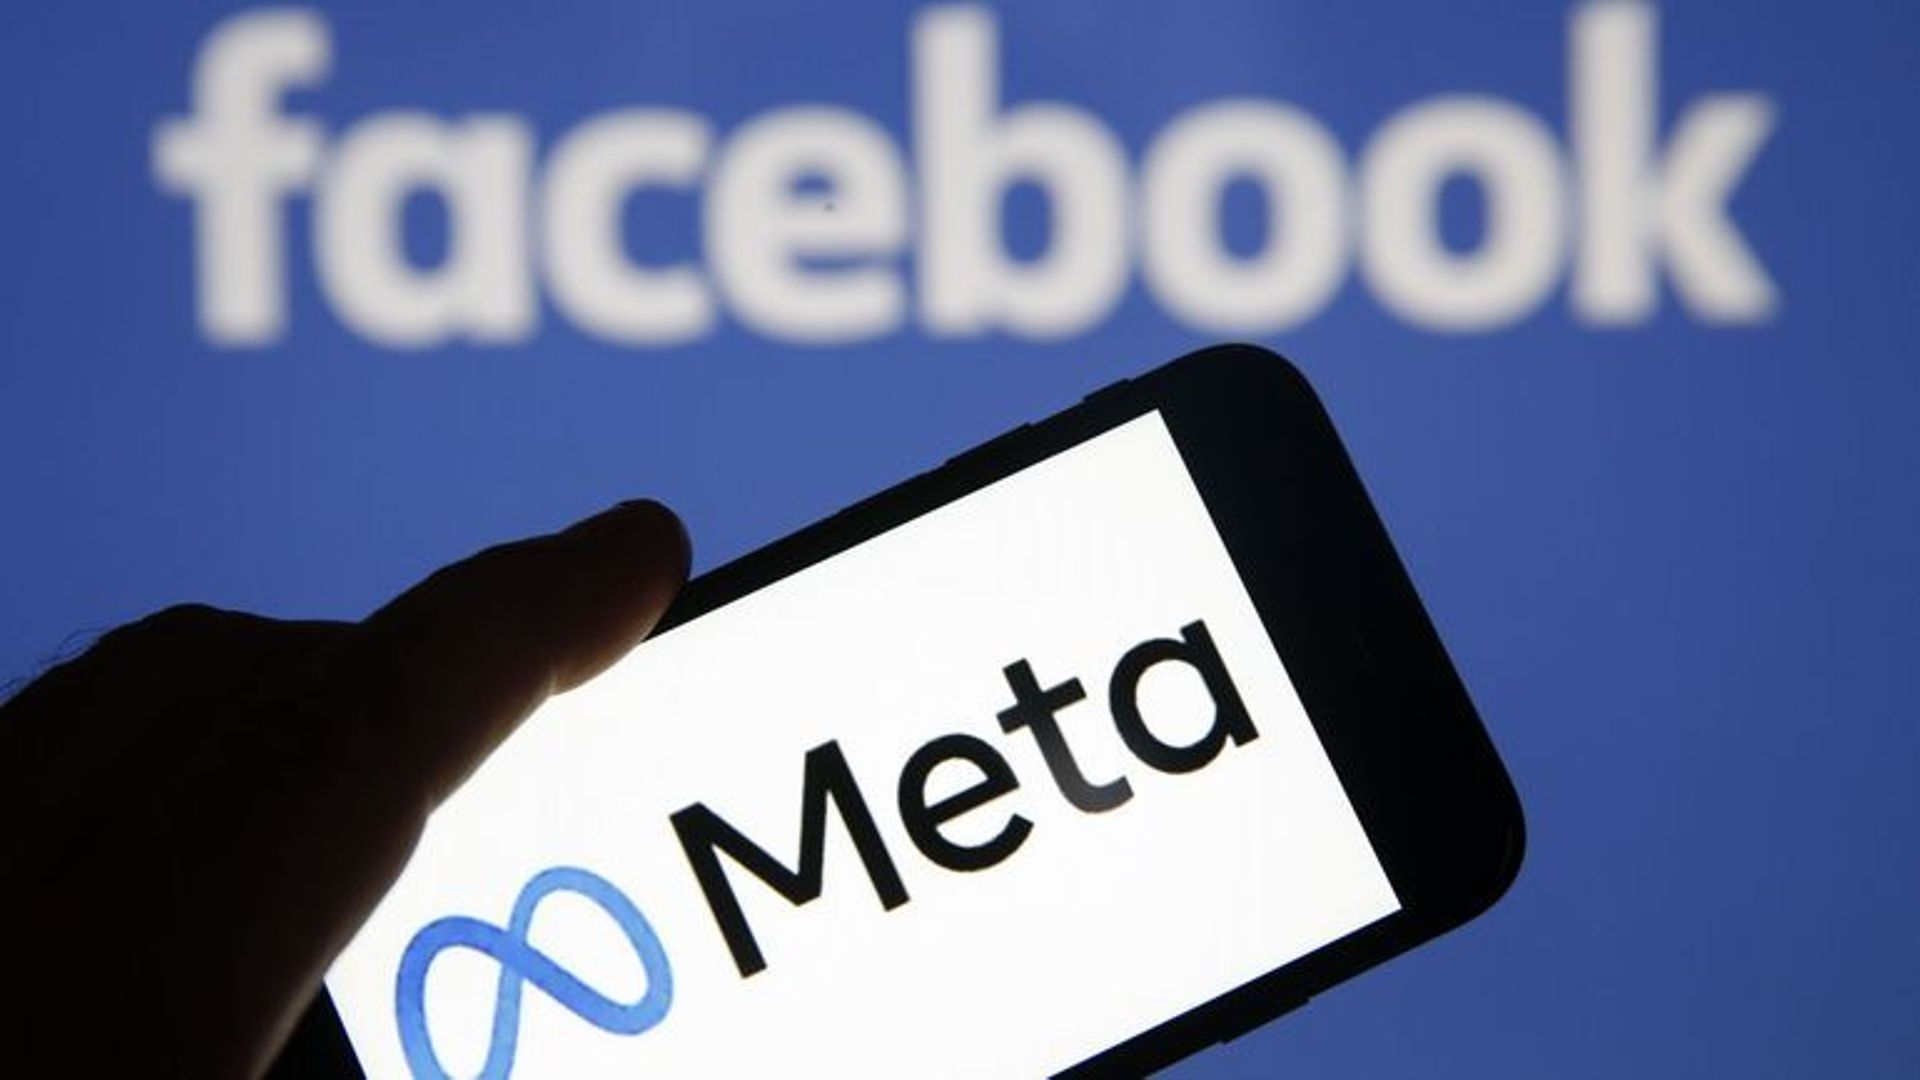 Instagram and Facebook launch new paid verification service, Meta Verified